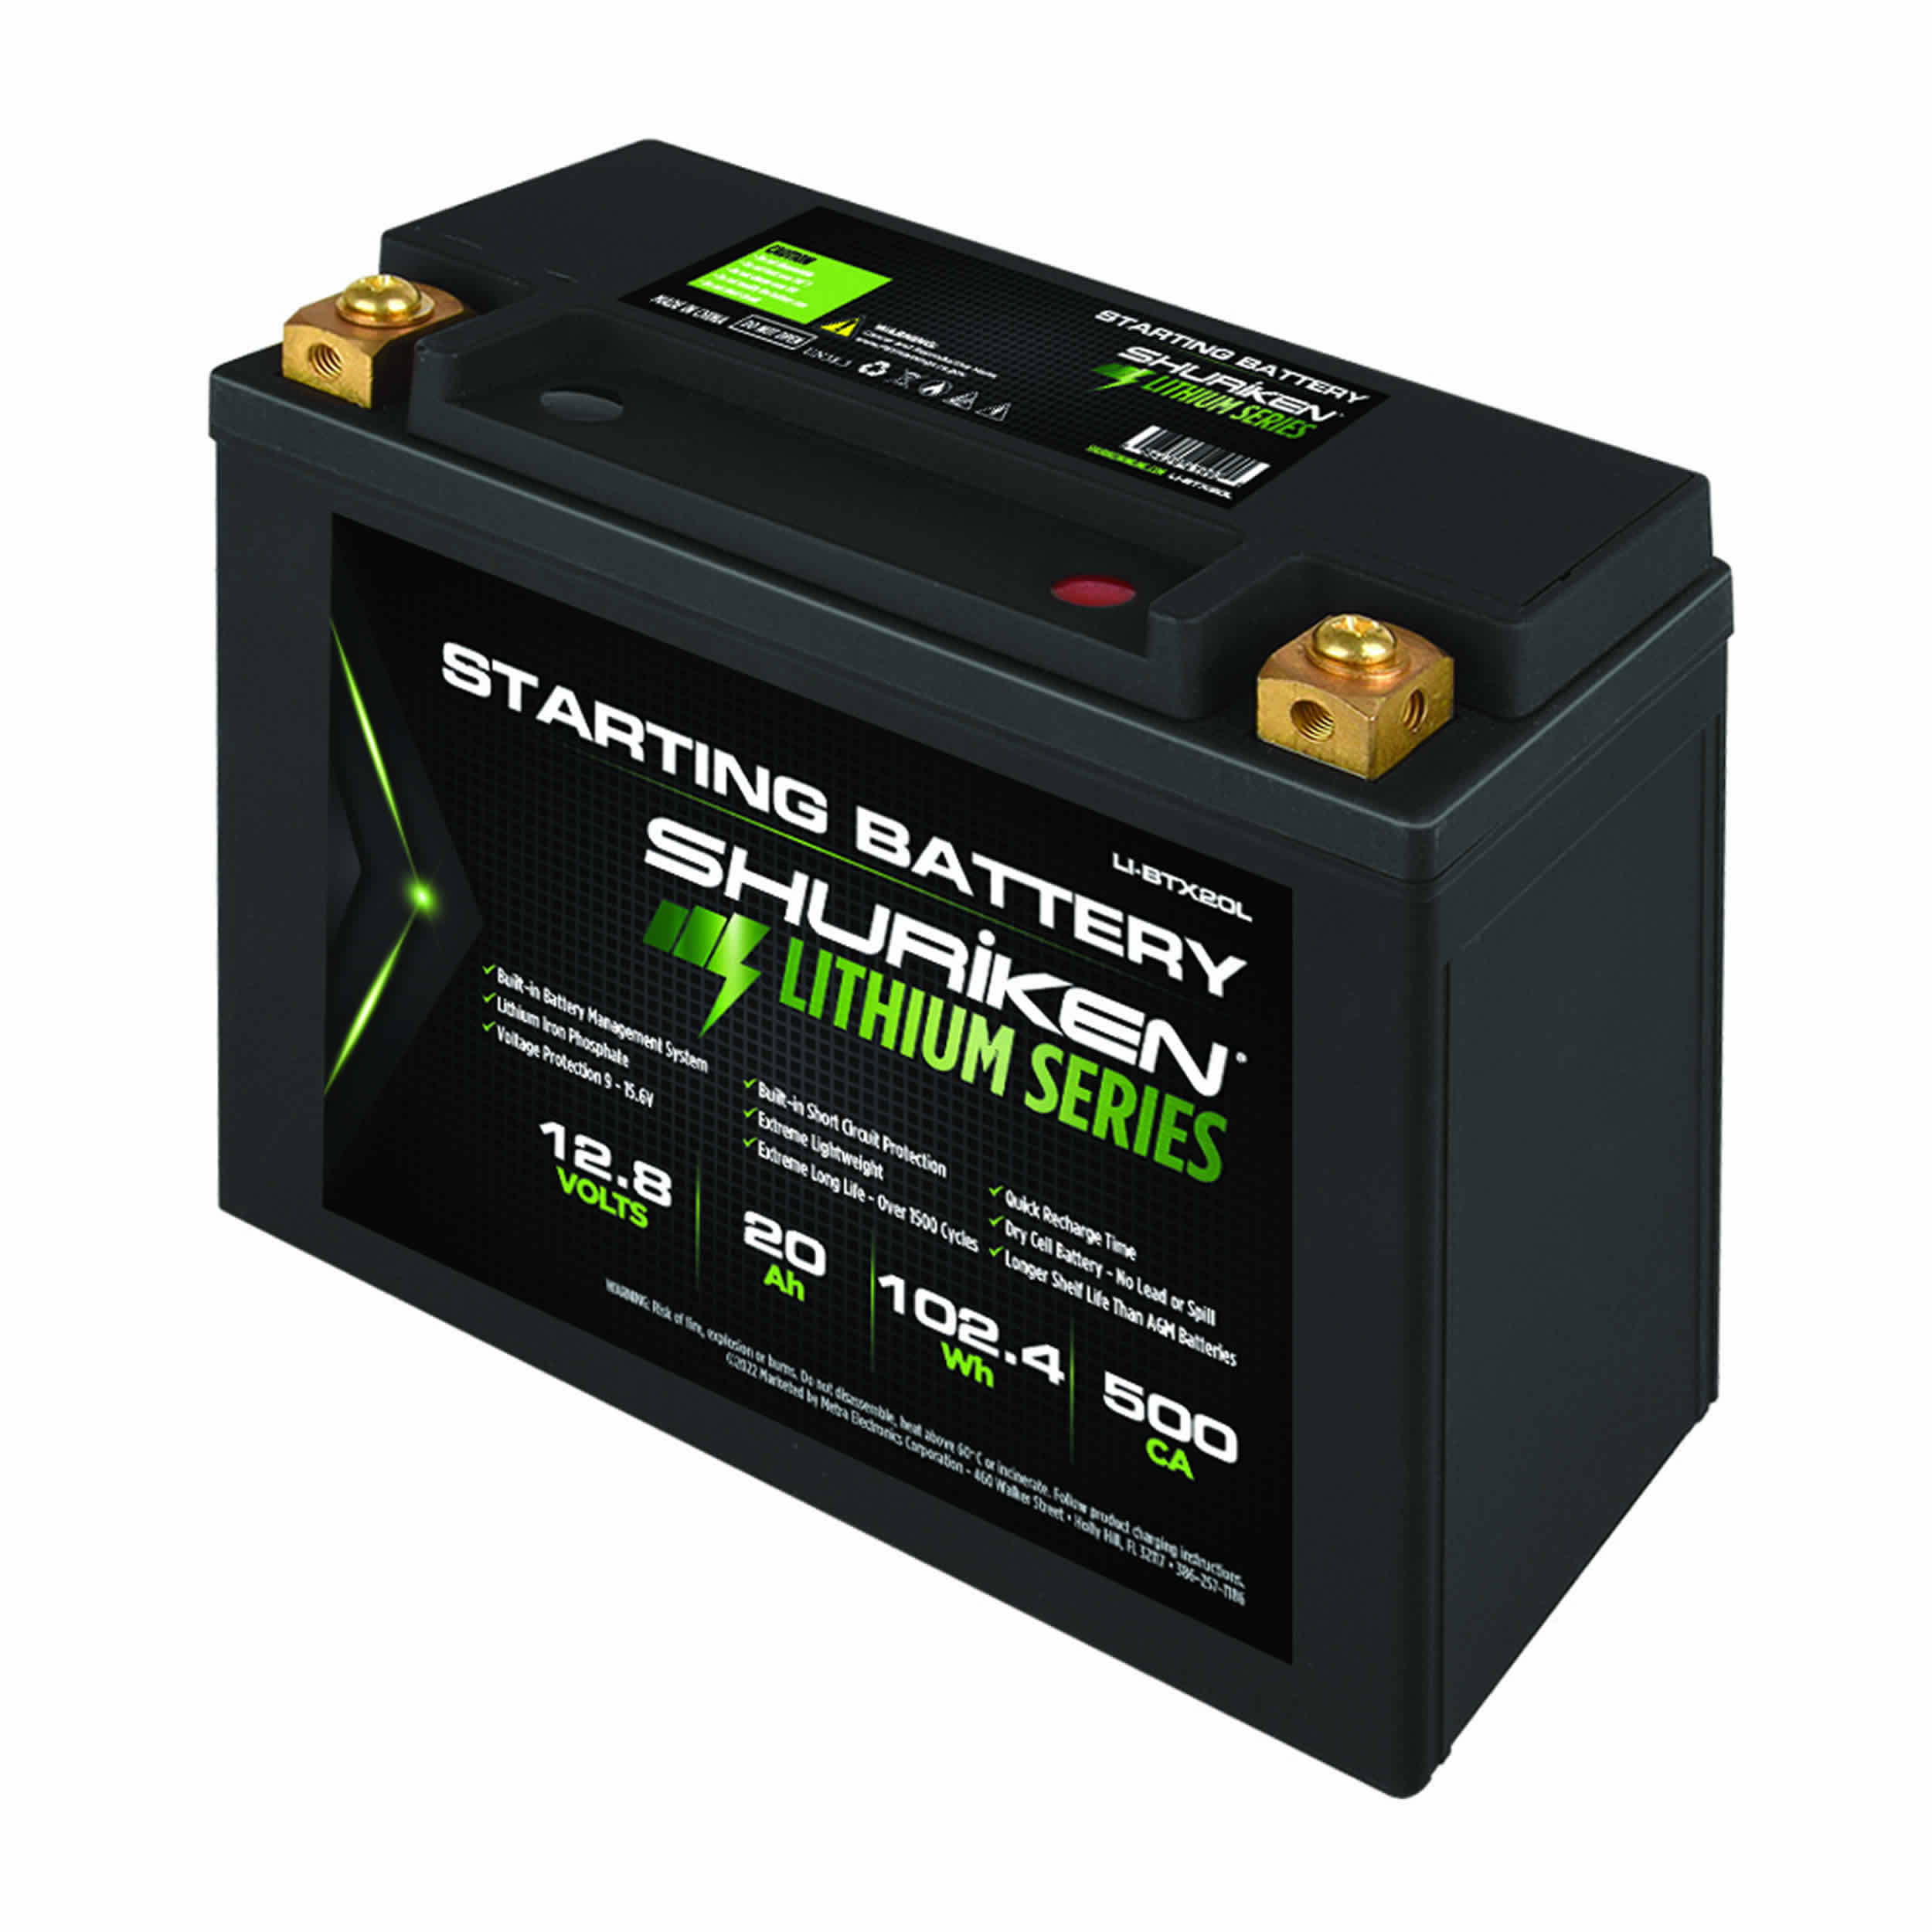 500CA / 20 Amp Hours Lithium-ion Starting Battery